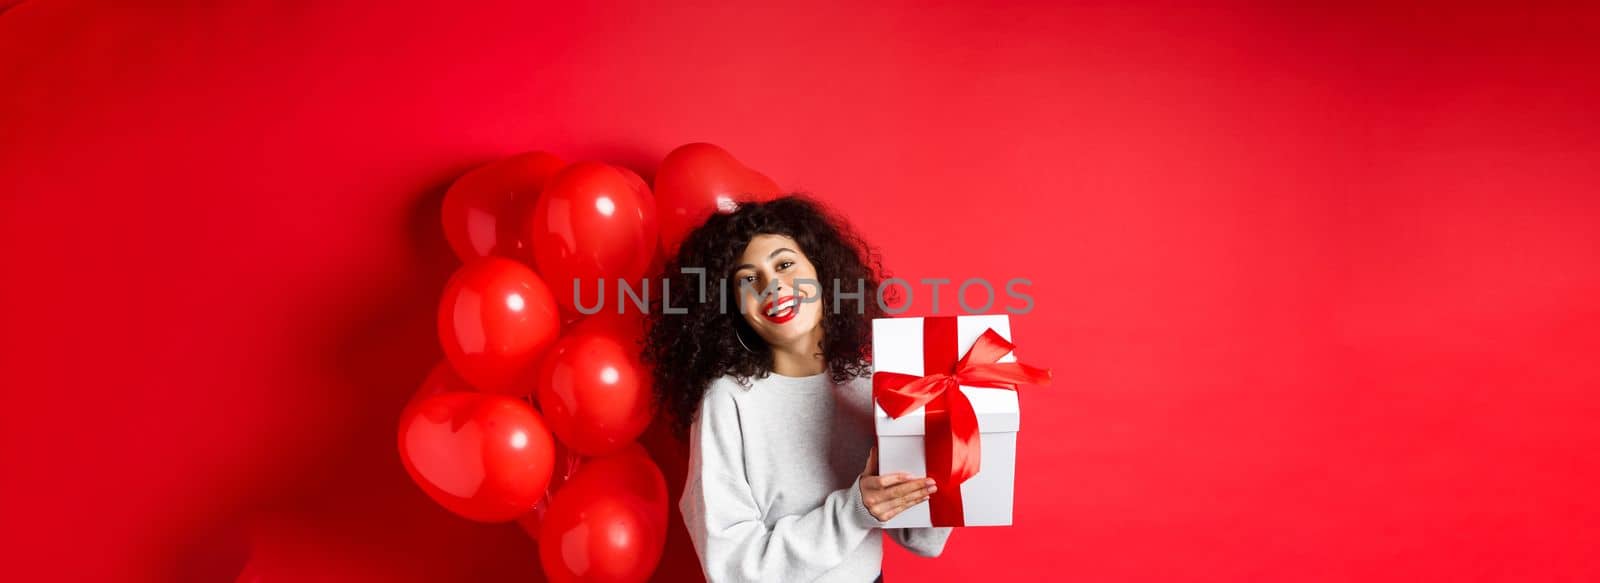 Holidays and celebration. Happy birthday girl holding gift and posing near party helium balloons, smiling excited at camera, red background.